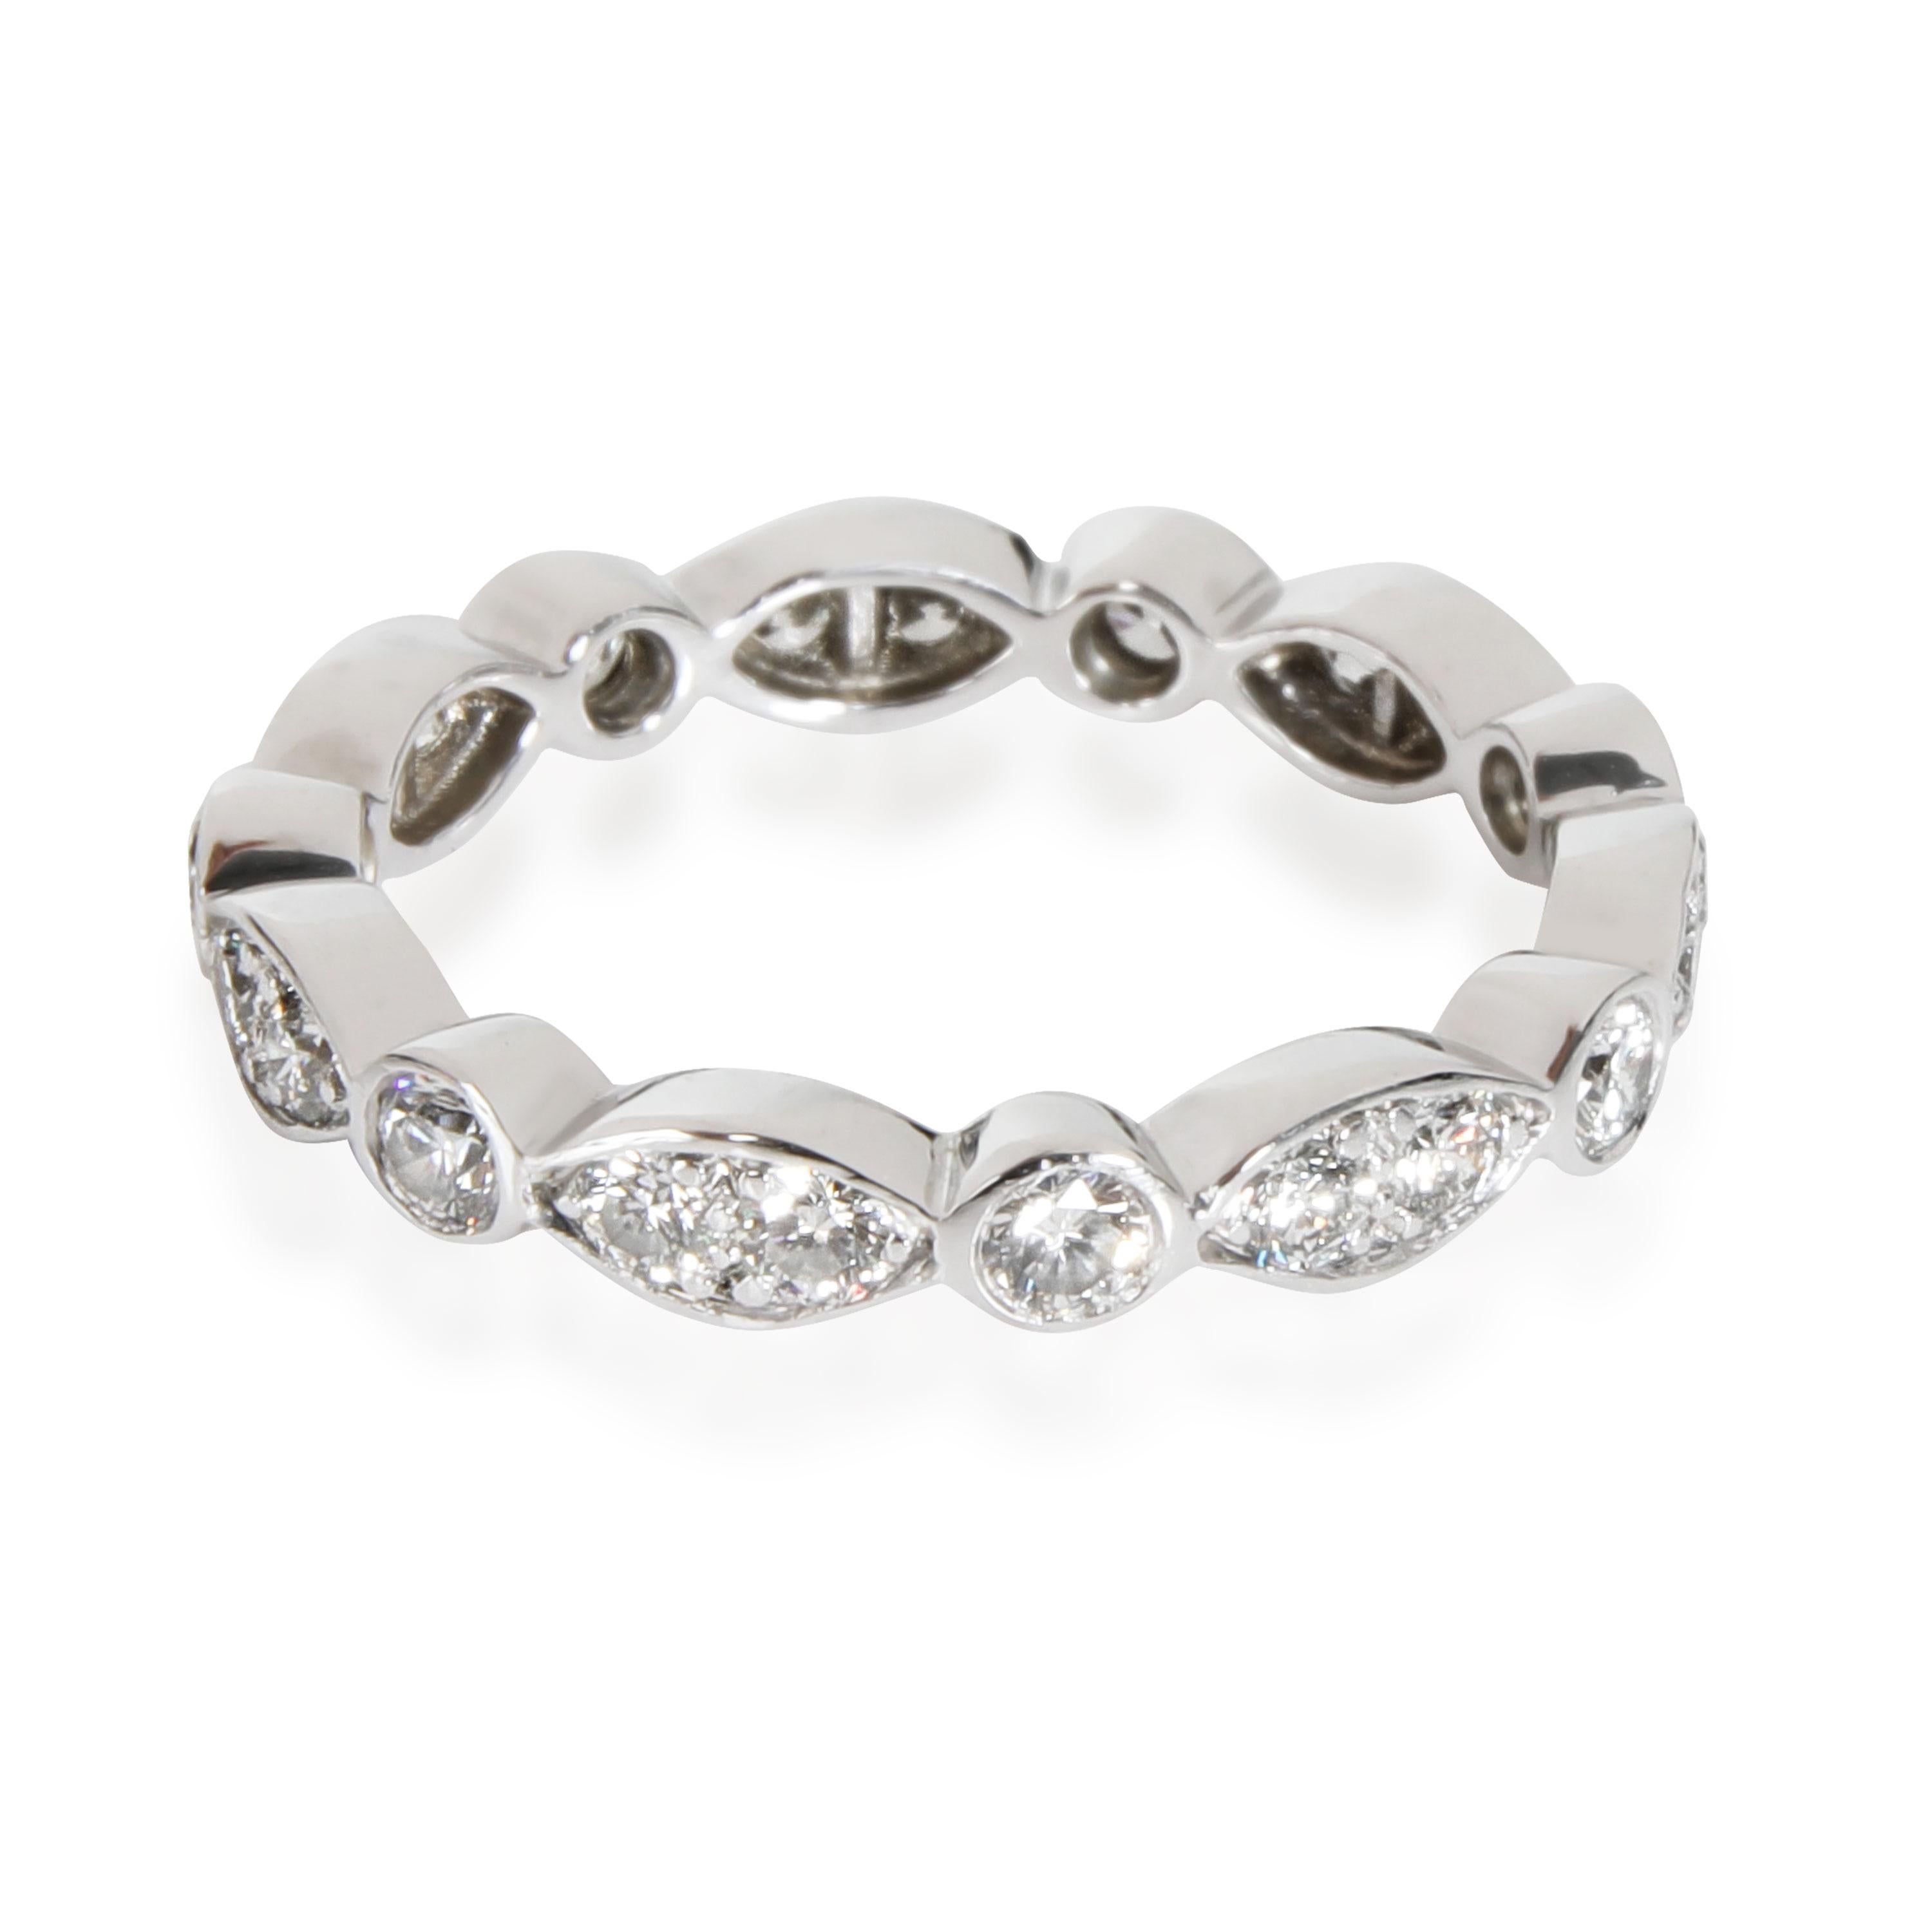 Tiffany & Co. Jazz Diamond Eternity Band in Platinum 0.60 CTW

PRIMARY DETAILS
SKU: 112234
Listing Title: Tiffany & Co. Jazz Diamond Eternity Band in Platinum 0.60 CTW
Condition Description: Capturing the spirit of jazz music is the Tiffany & Co.